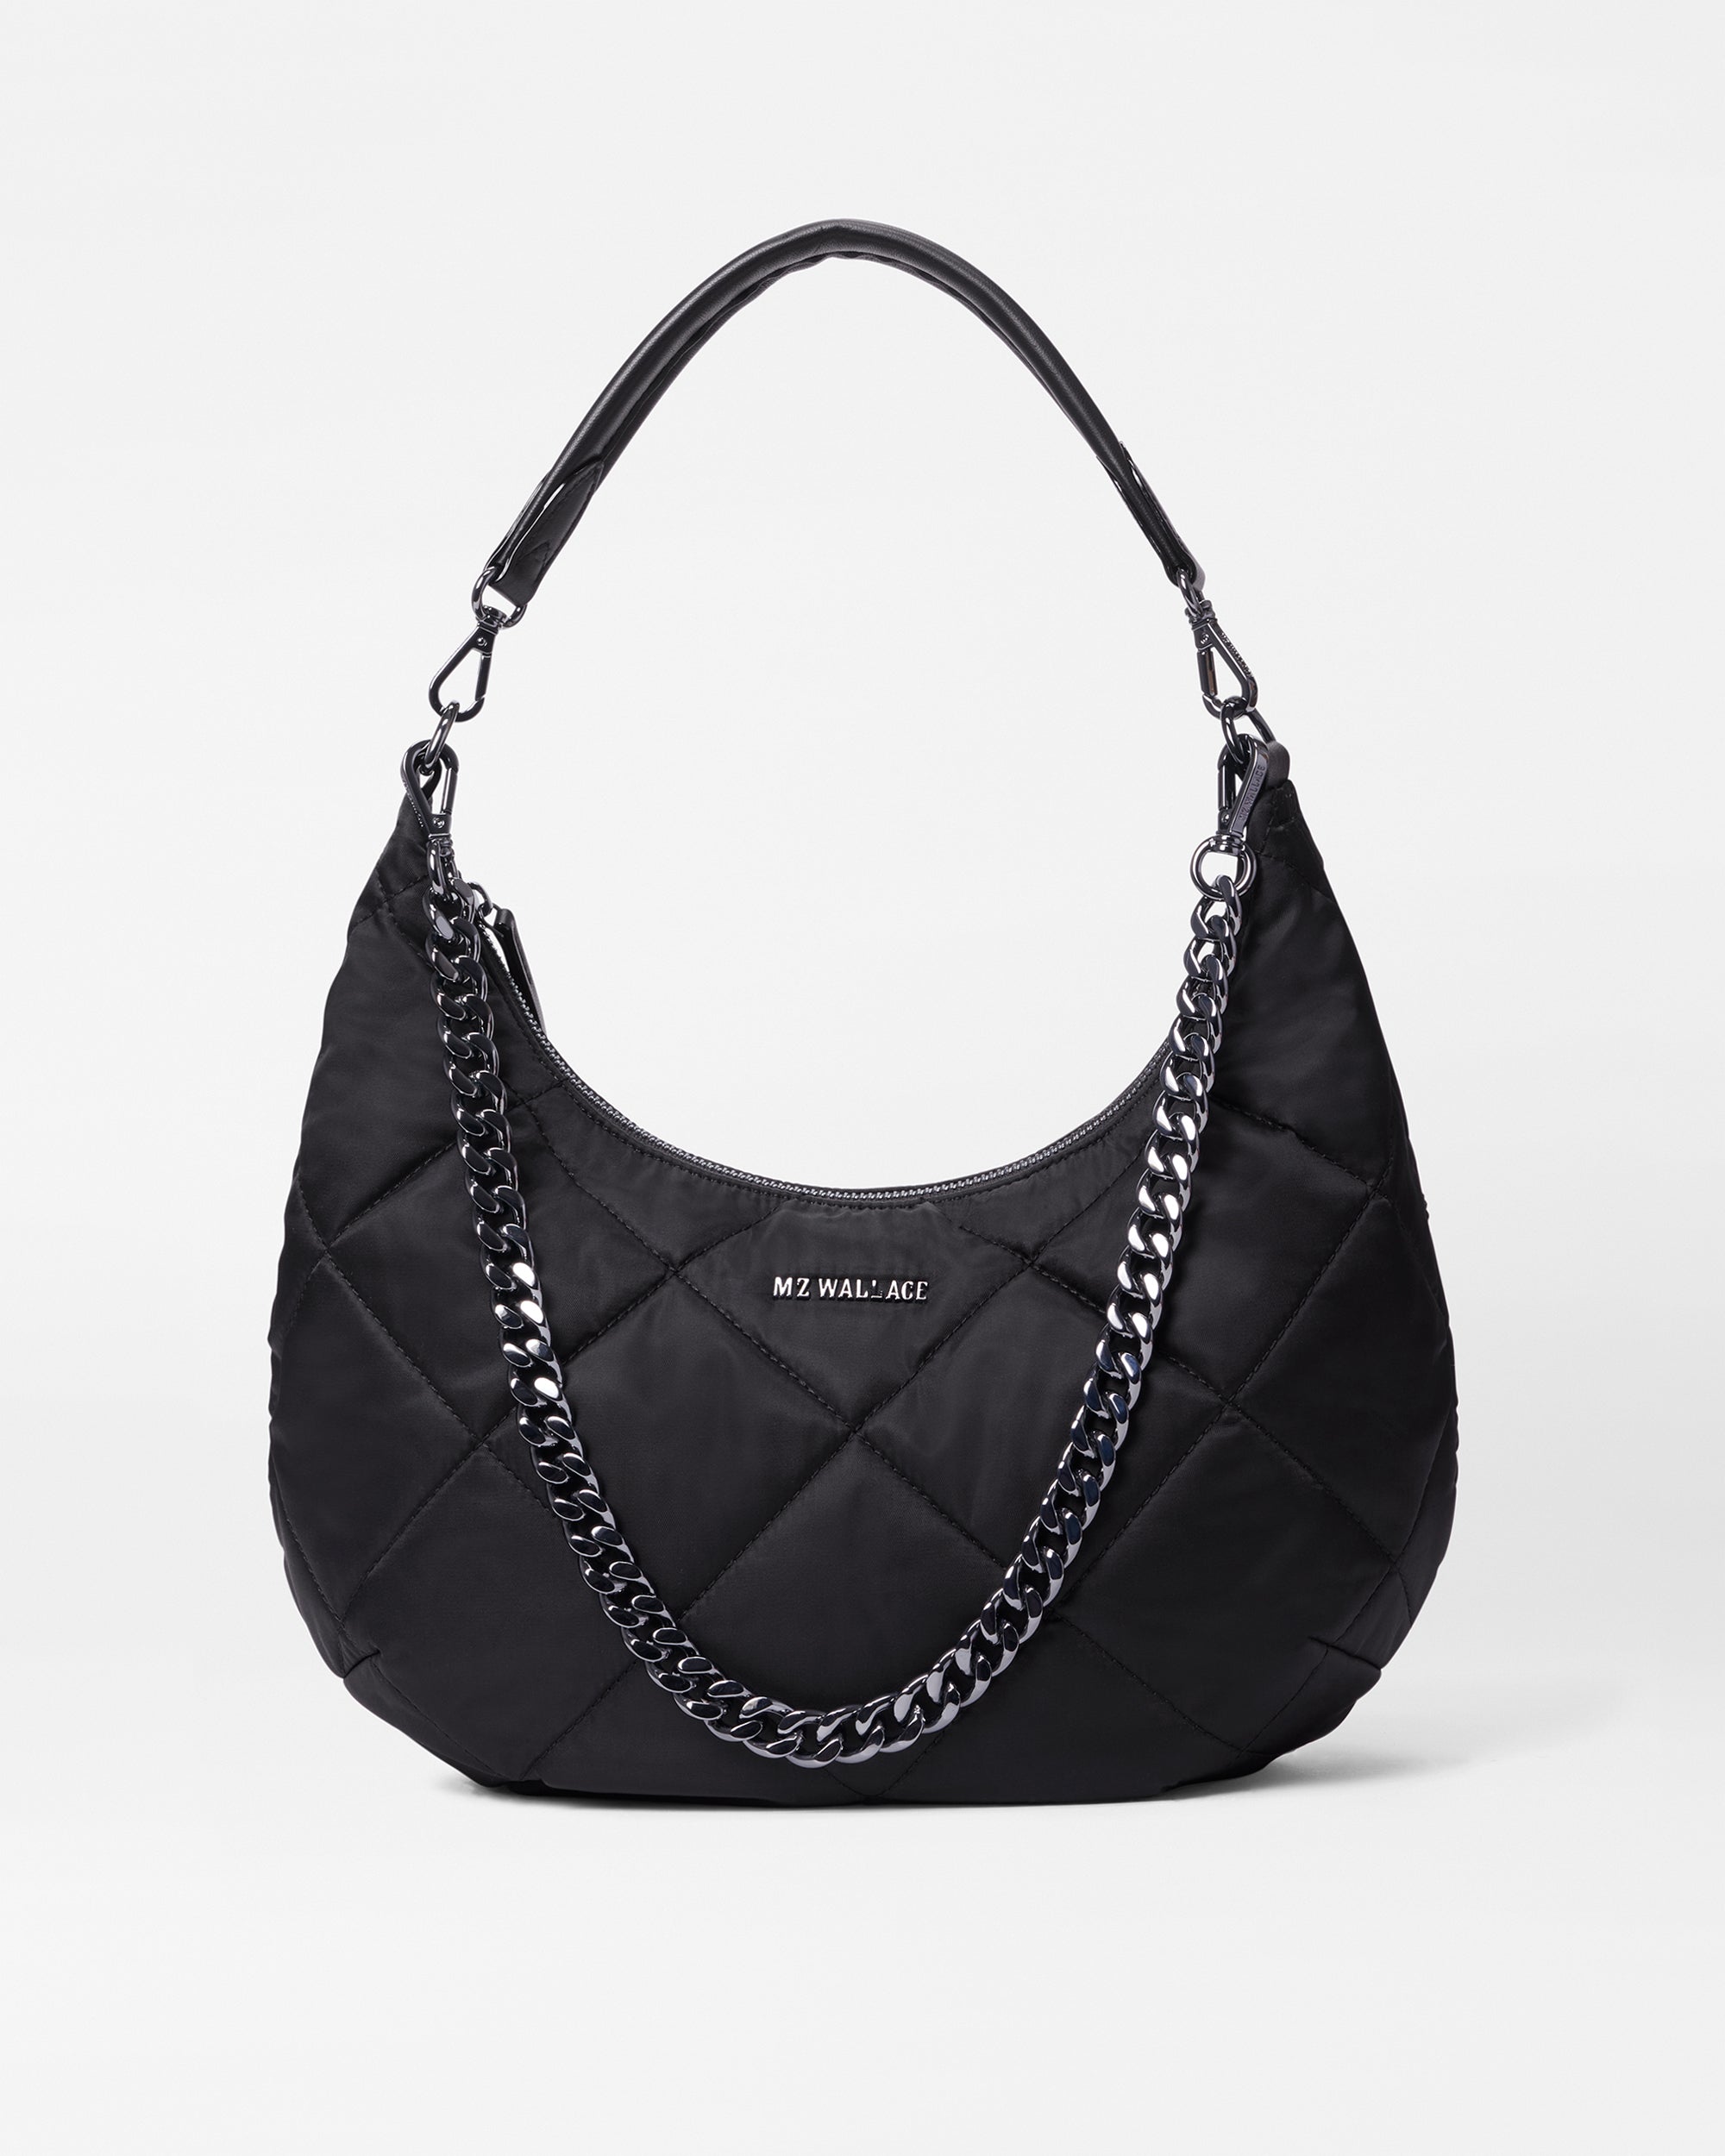 Black quilted cross body bag